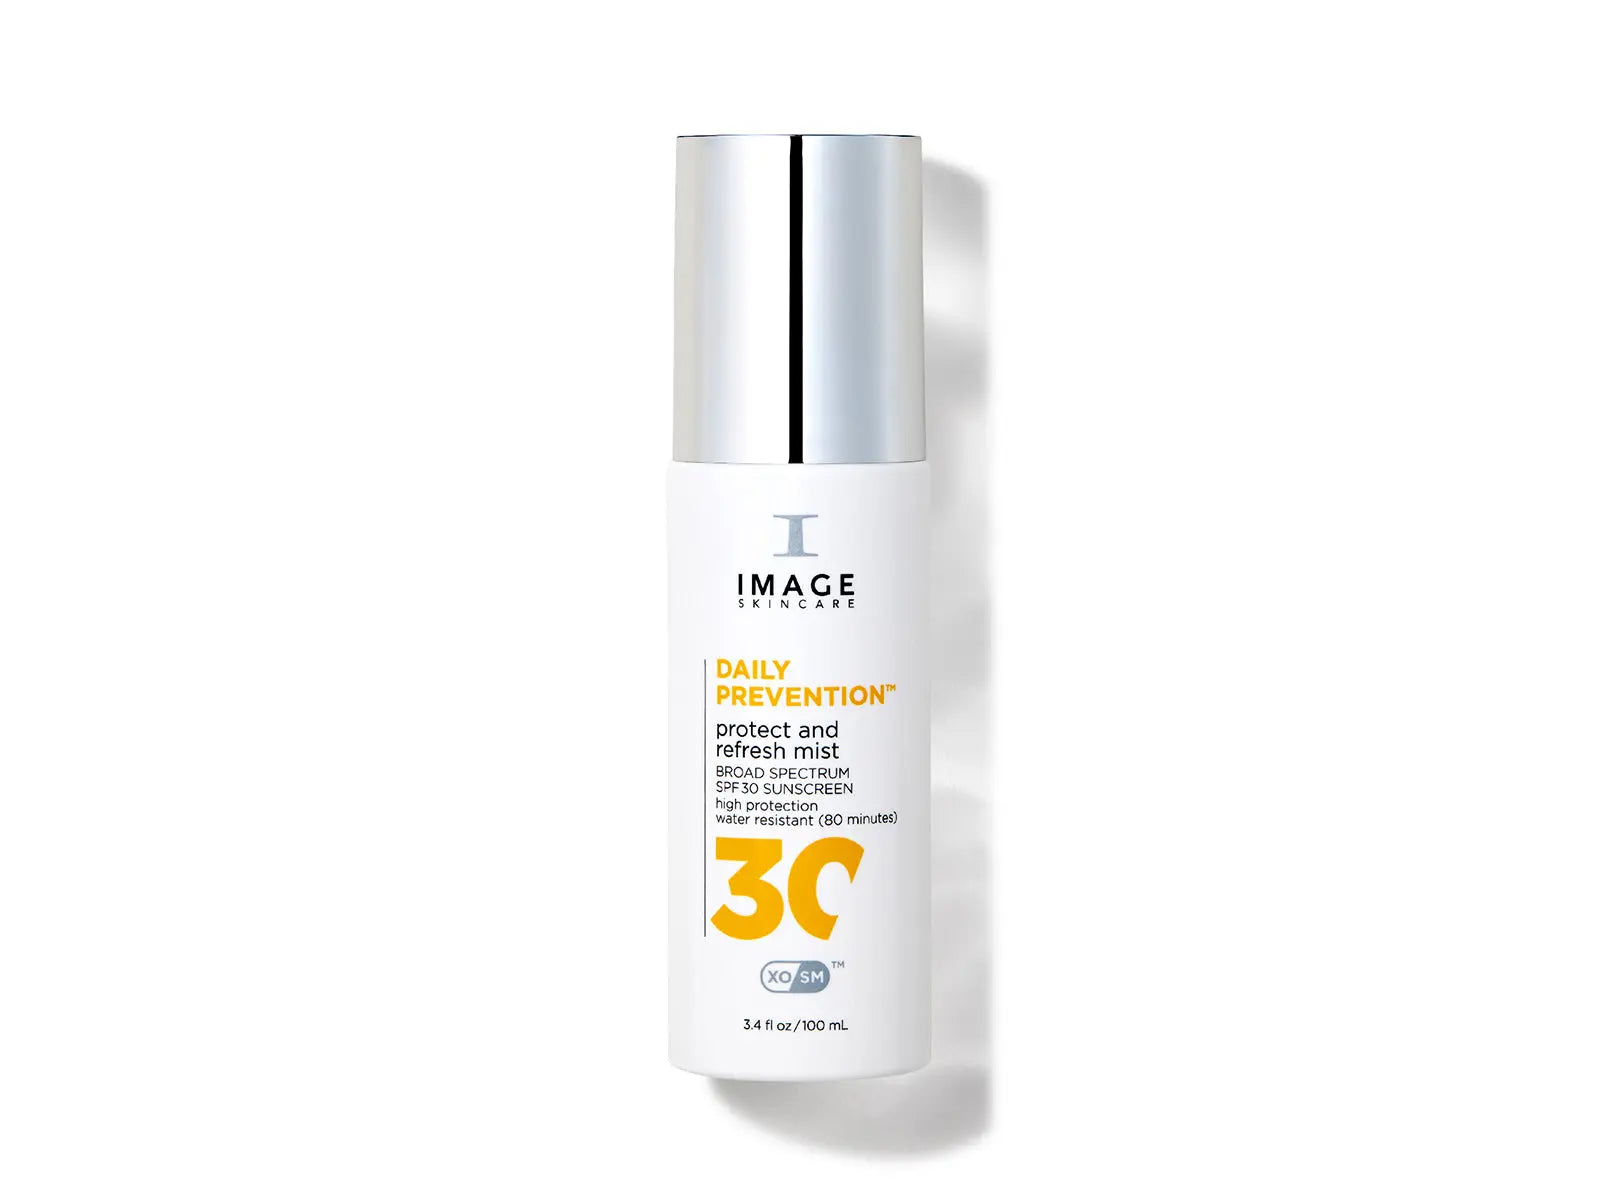 Daily Prevention - Protect And Refresh Mist SPF 30 IMAGE